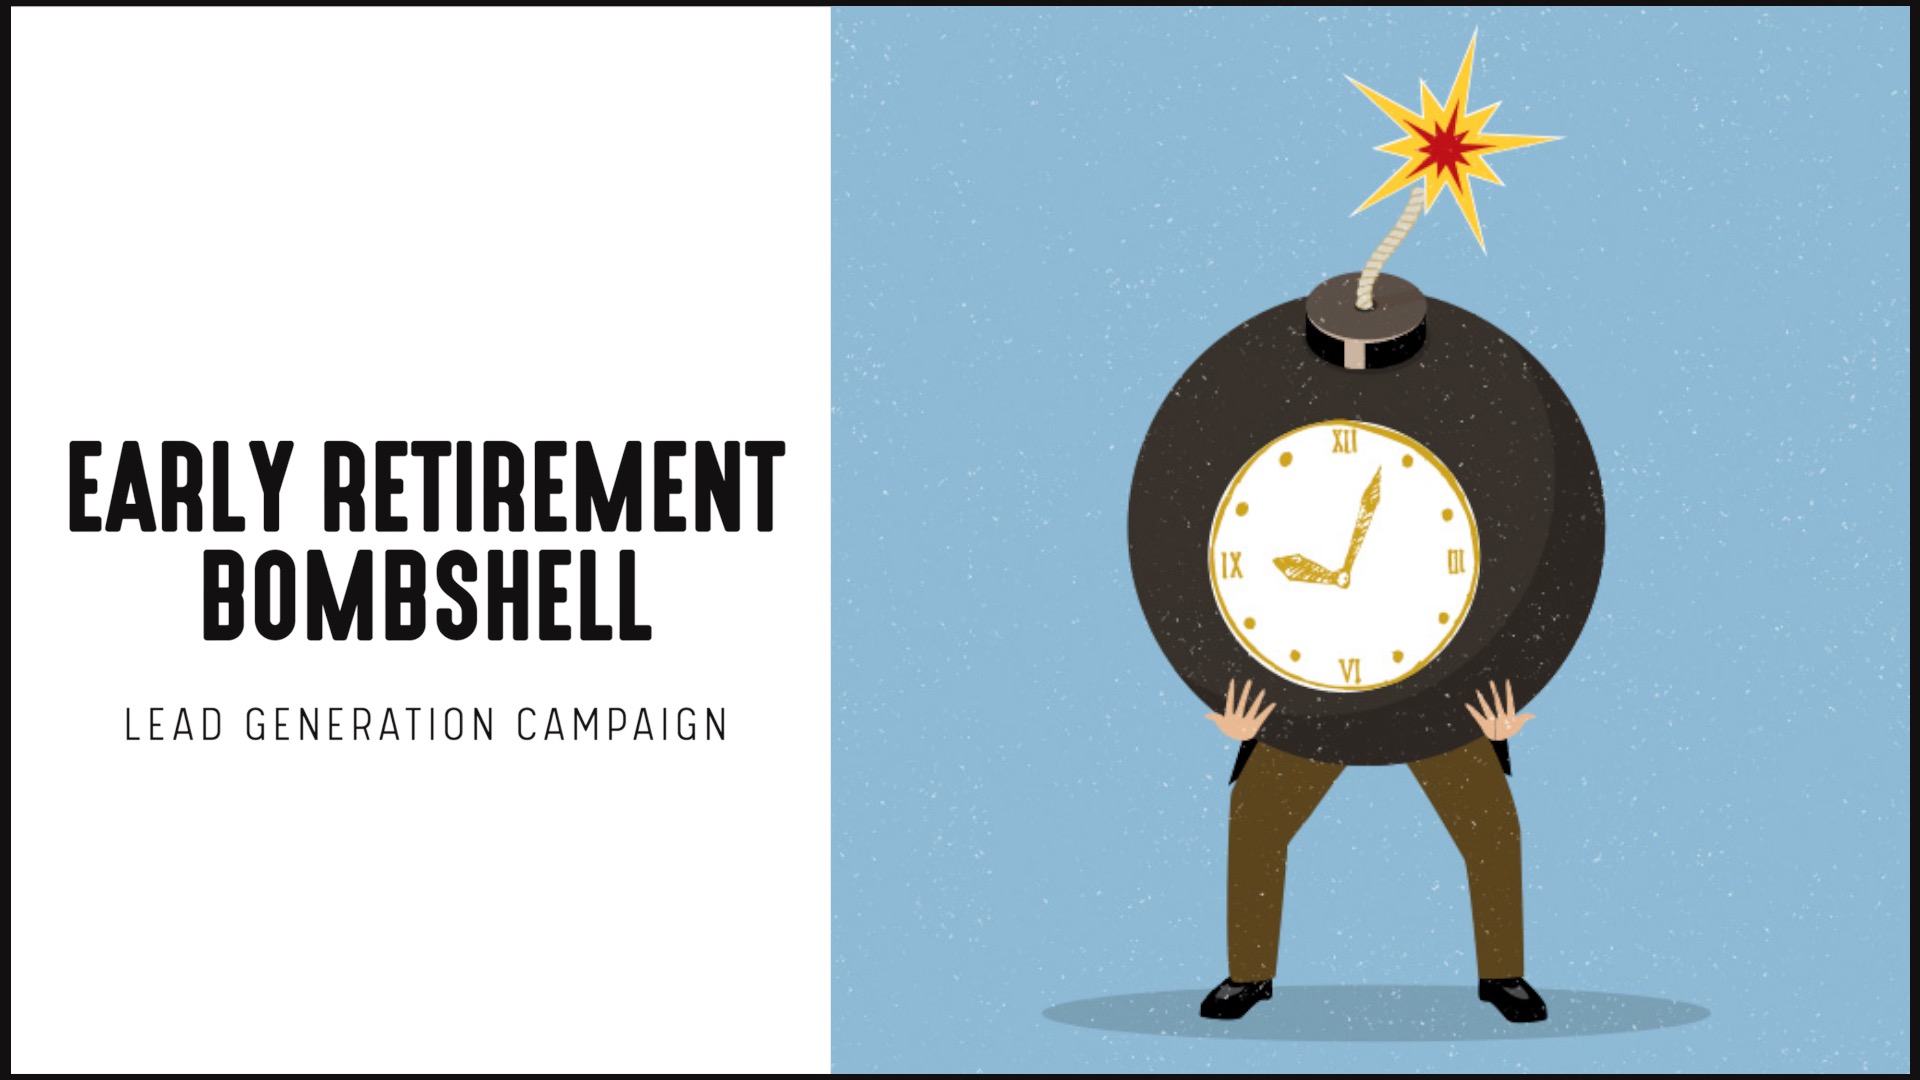 [NEW] Lead Gen Campaign | Early Retirement Time Bomb